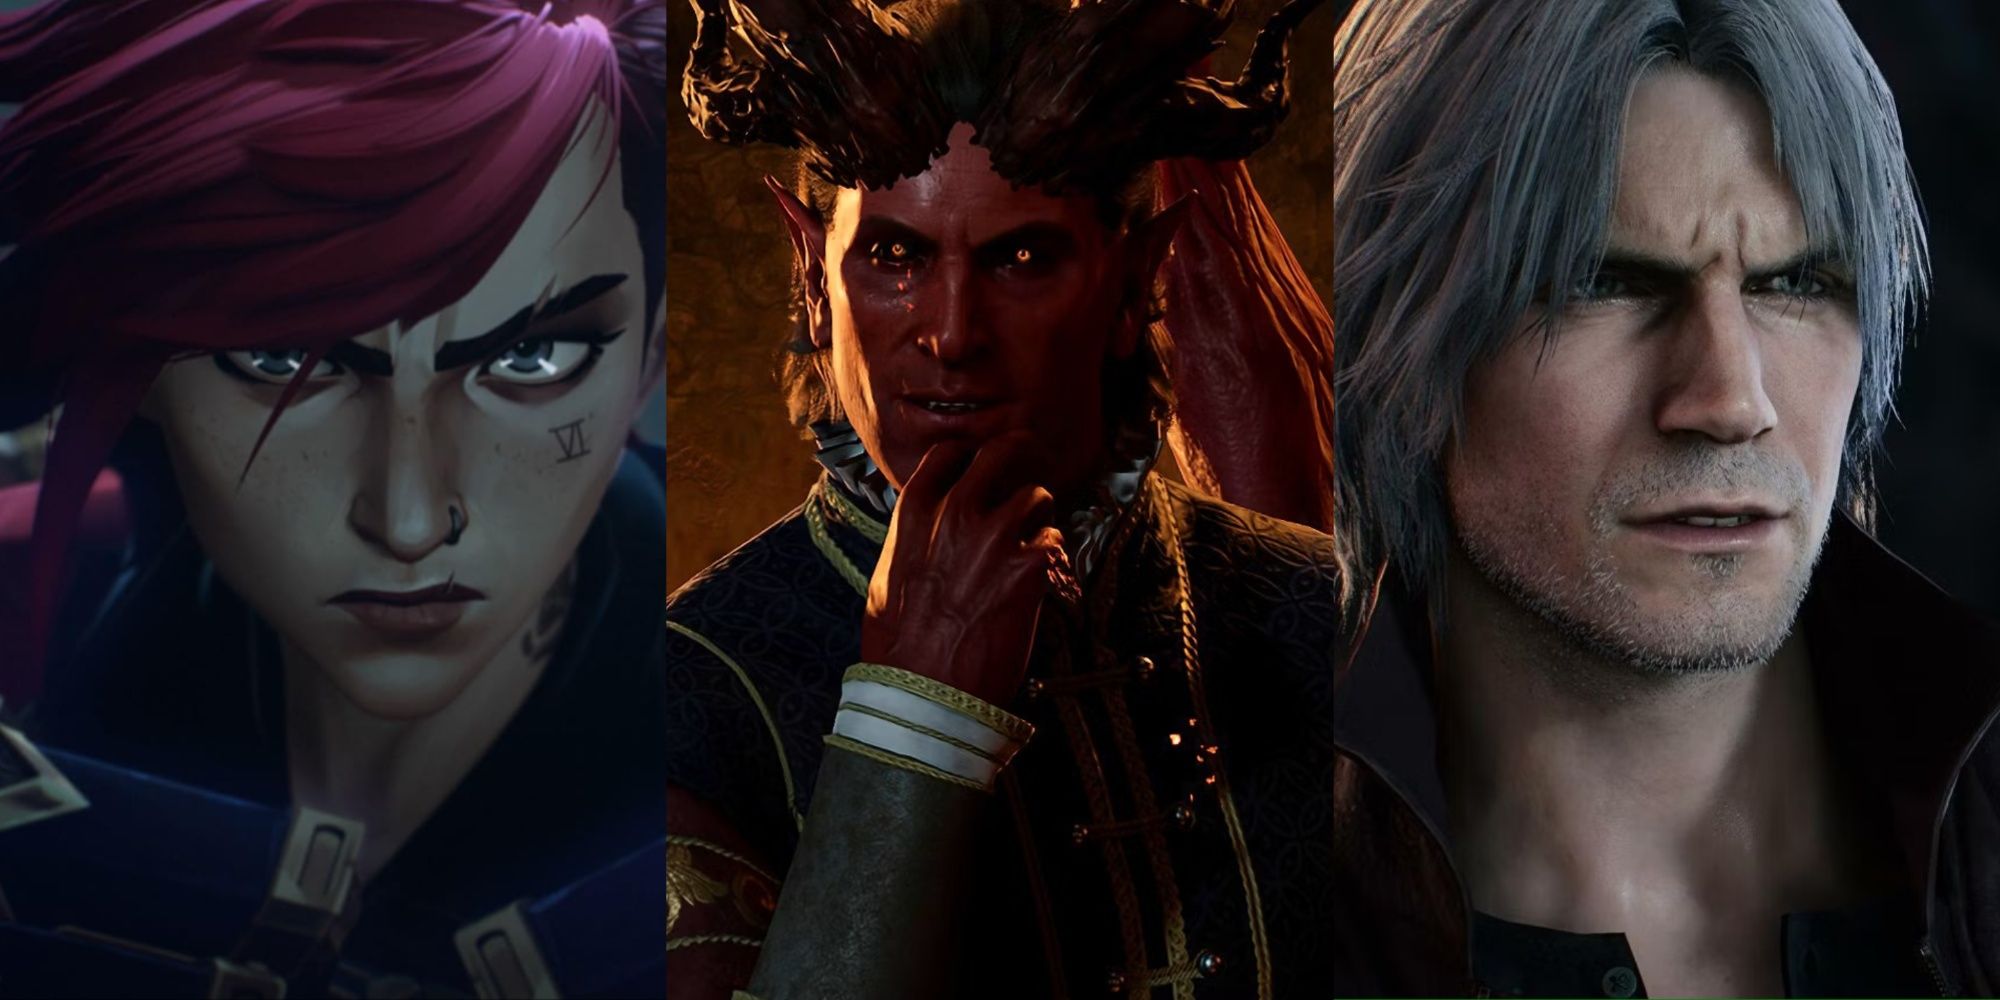 Three-image collage of Vi from Arcane, Raphael from Baldur's Gate 3, and Dante from Devil May Cry 5.